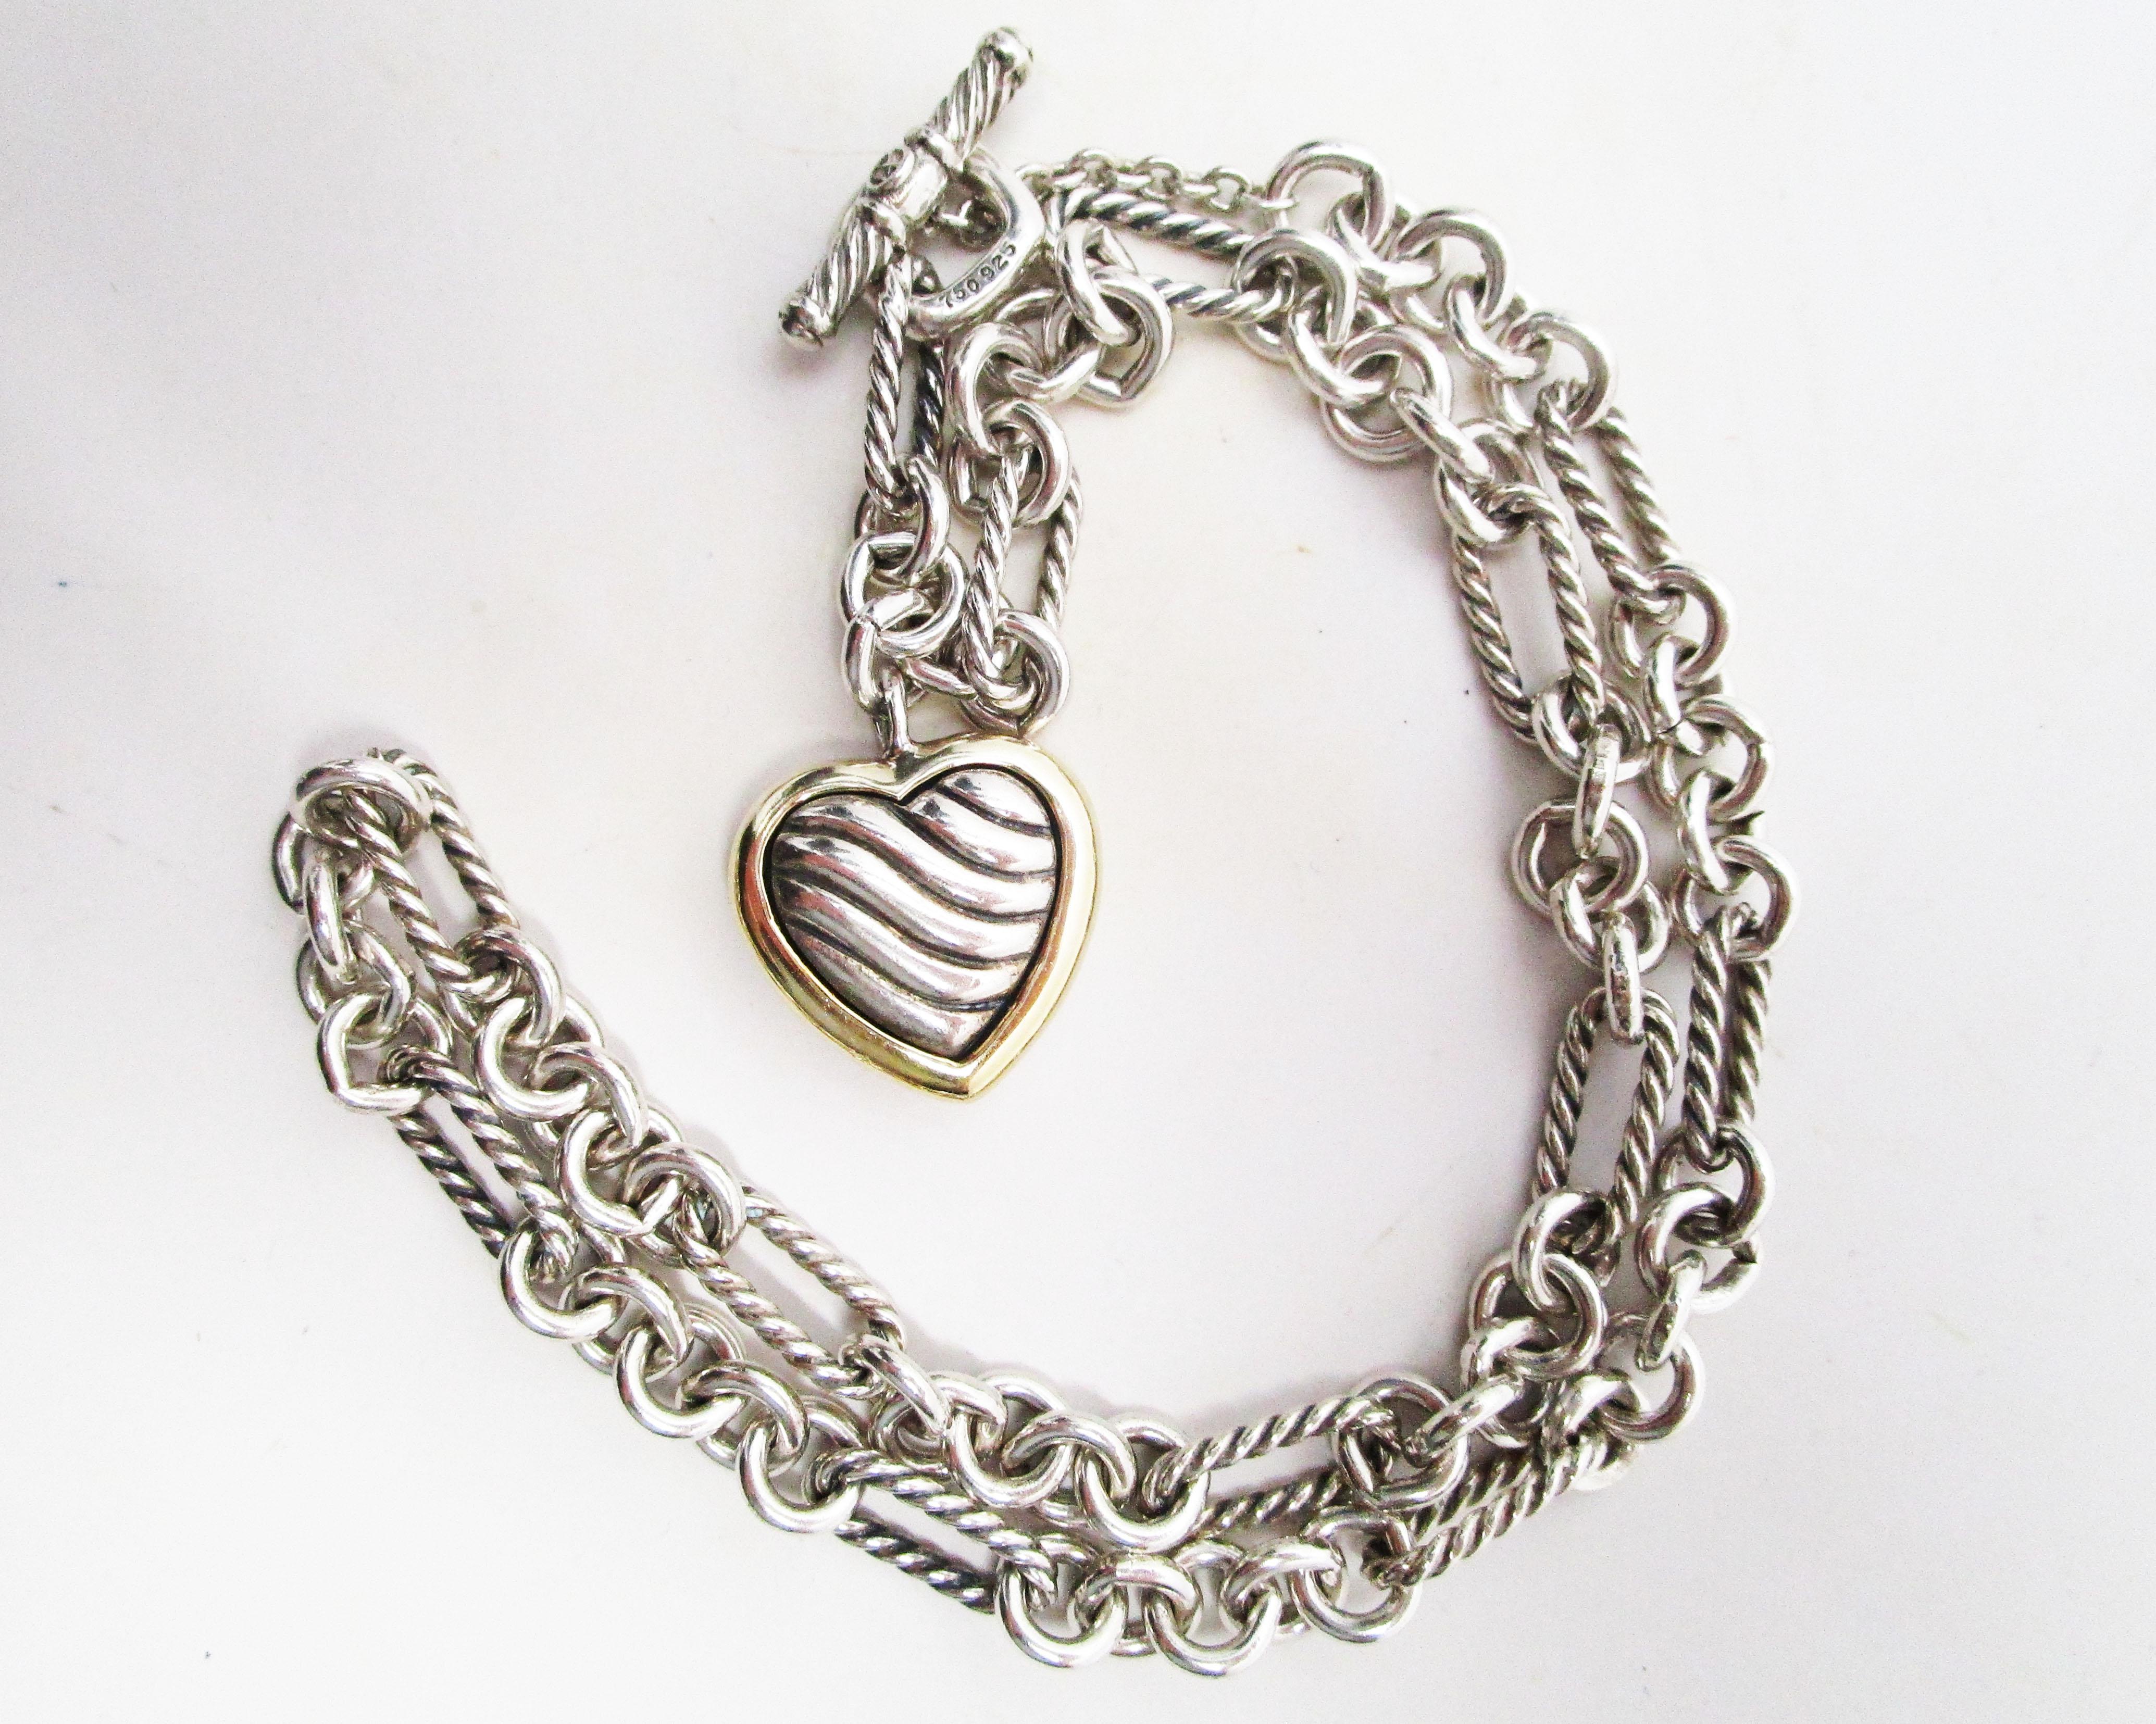 This remarkable David Yurman designer necklace is in 18k yellow gold and sterling silver and features a great chain link design with a fantastic heart pendant! The necklace has a bold link featuring the classic David Yurman twist wire look. The